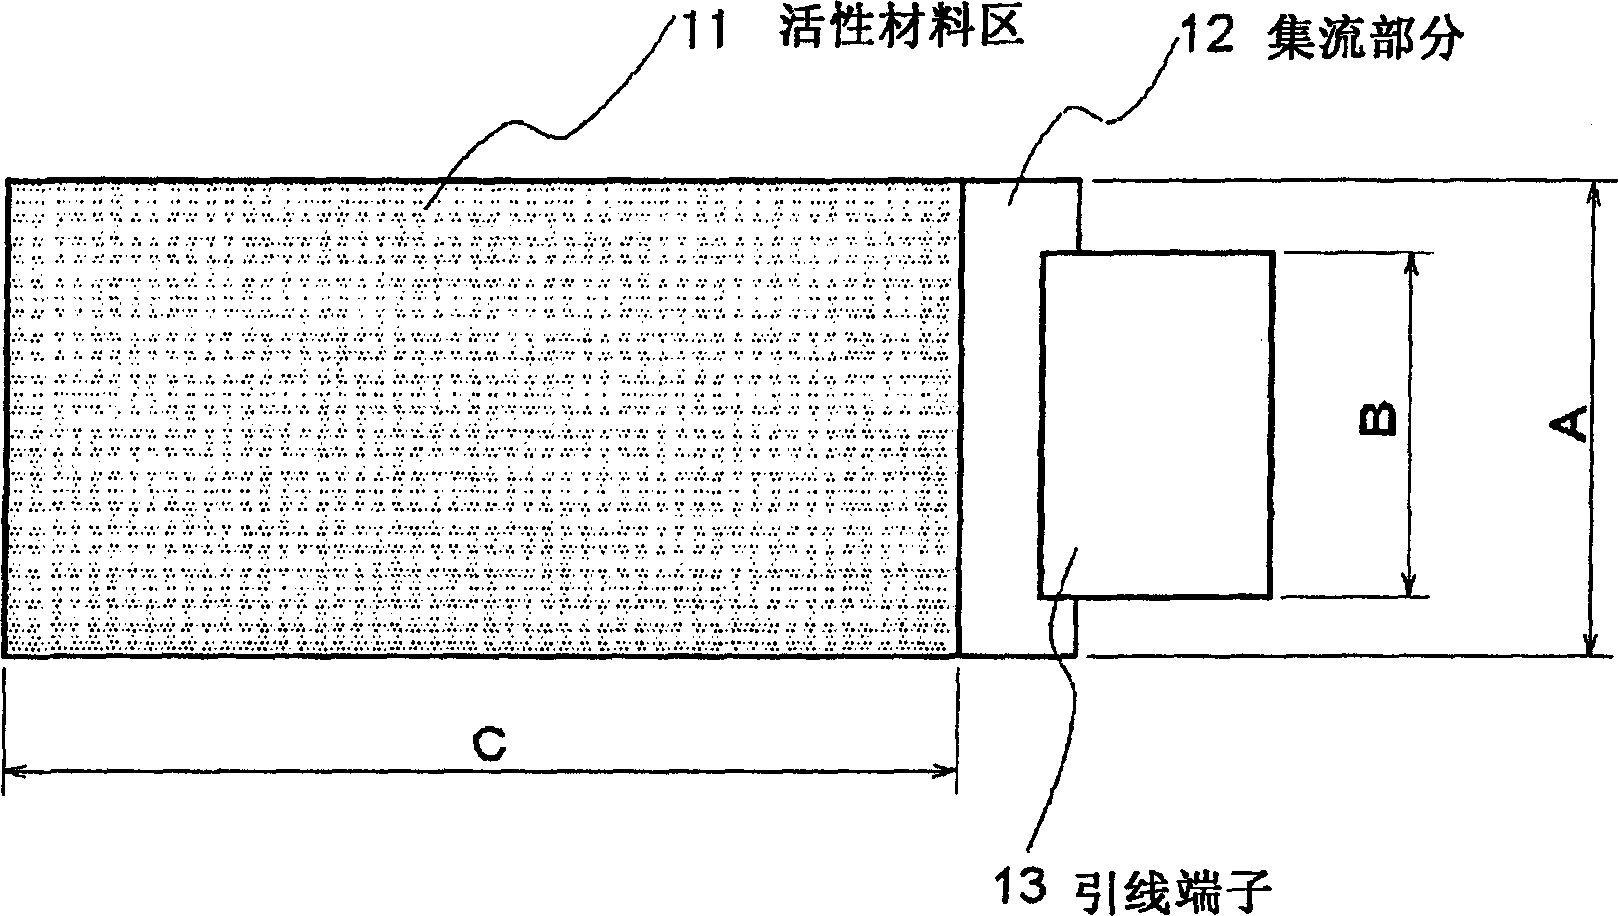 Lithium ion secondary cell